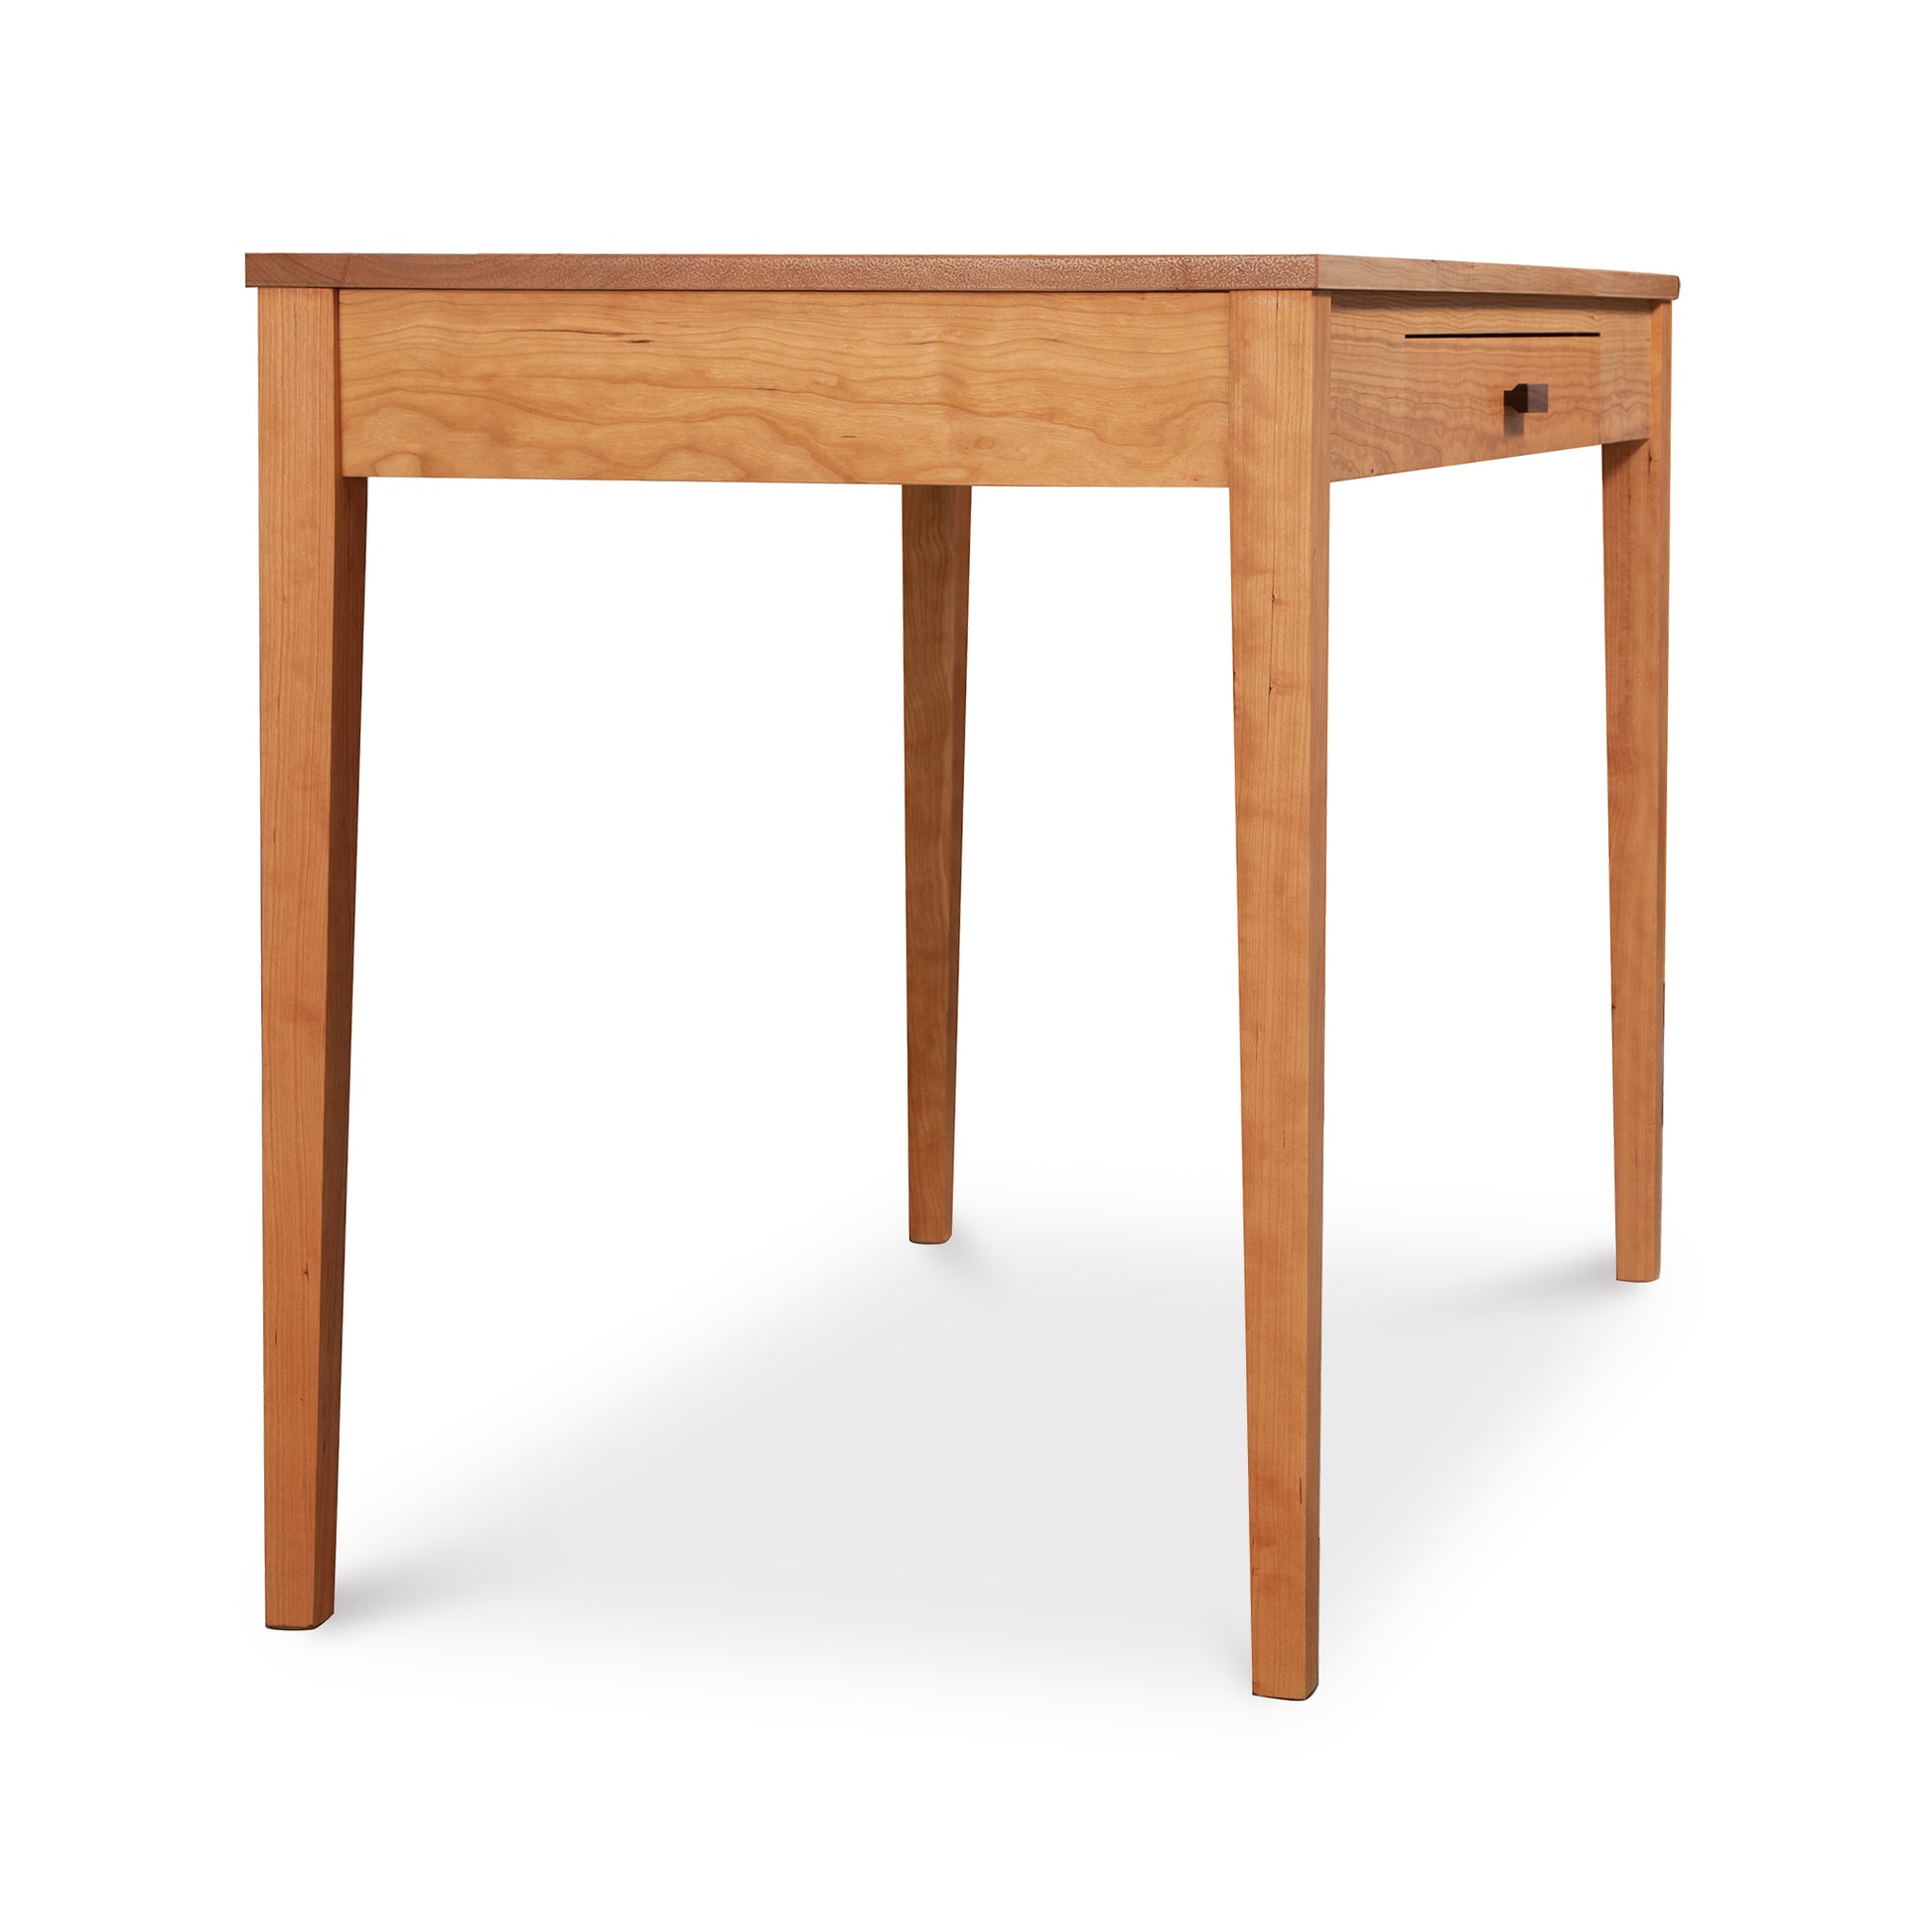 A contemporary style Image of the Andover Modern Writing Desk, a solid wood writing desk with a drawer, handcrafted to perfection by Maple Corner Woodworks.